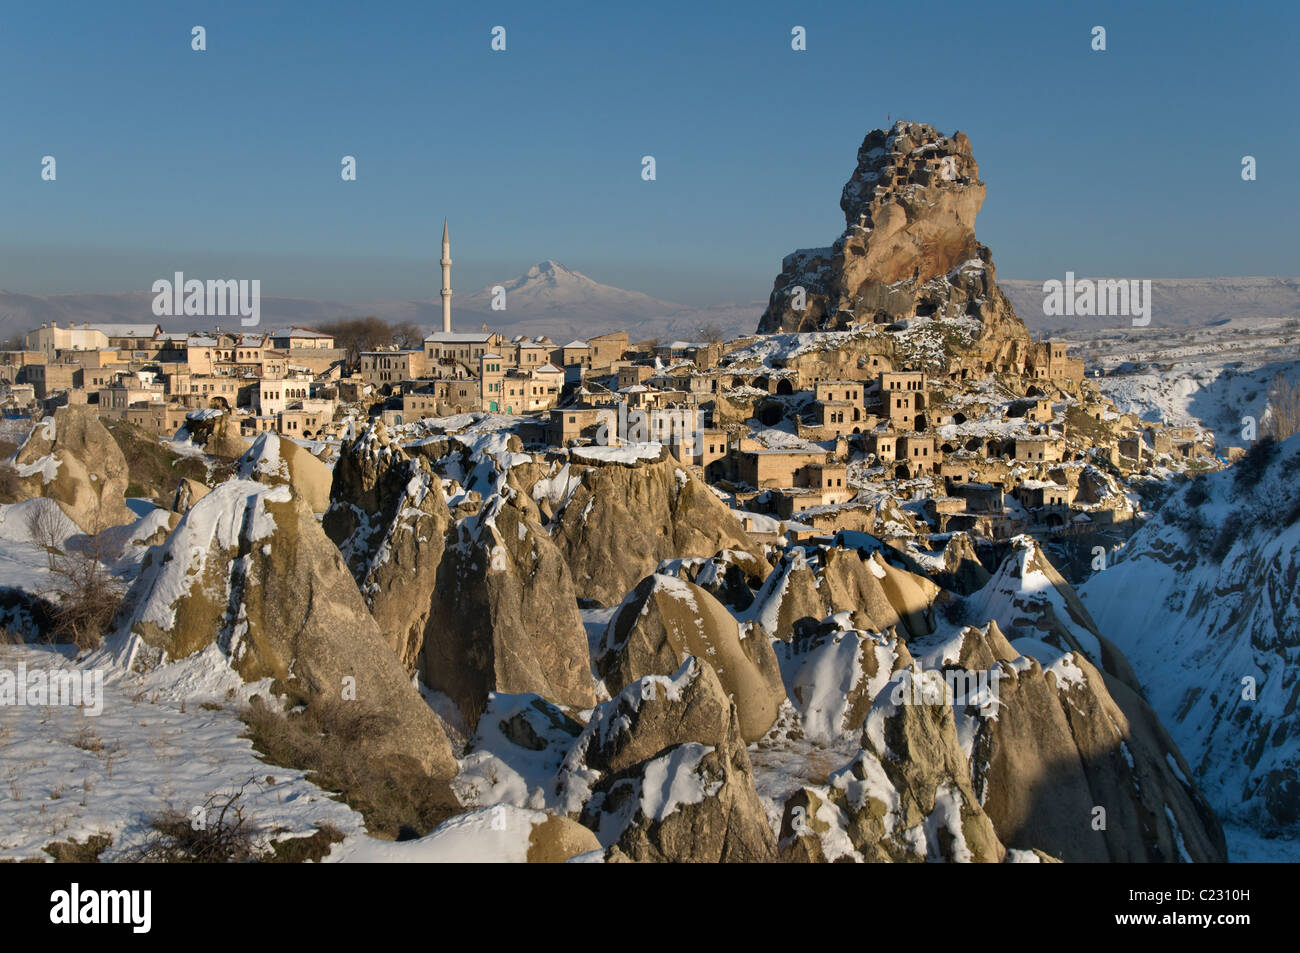 The town of Ortahisar and Mount Erciyes in Cappadocia,Central Anatolia of Turkey Stock Photo